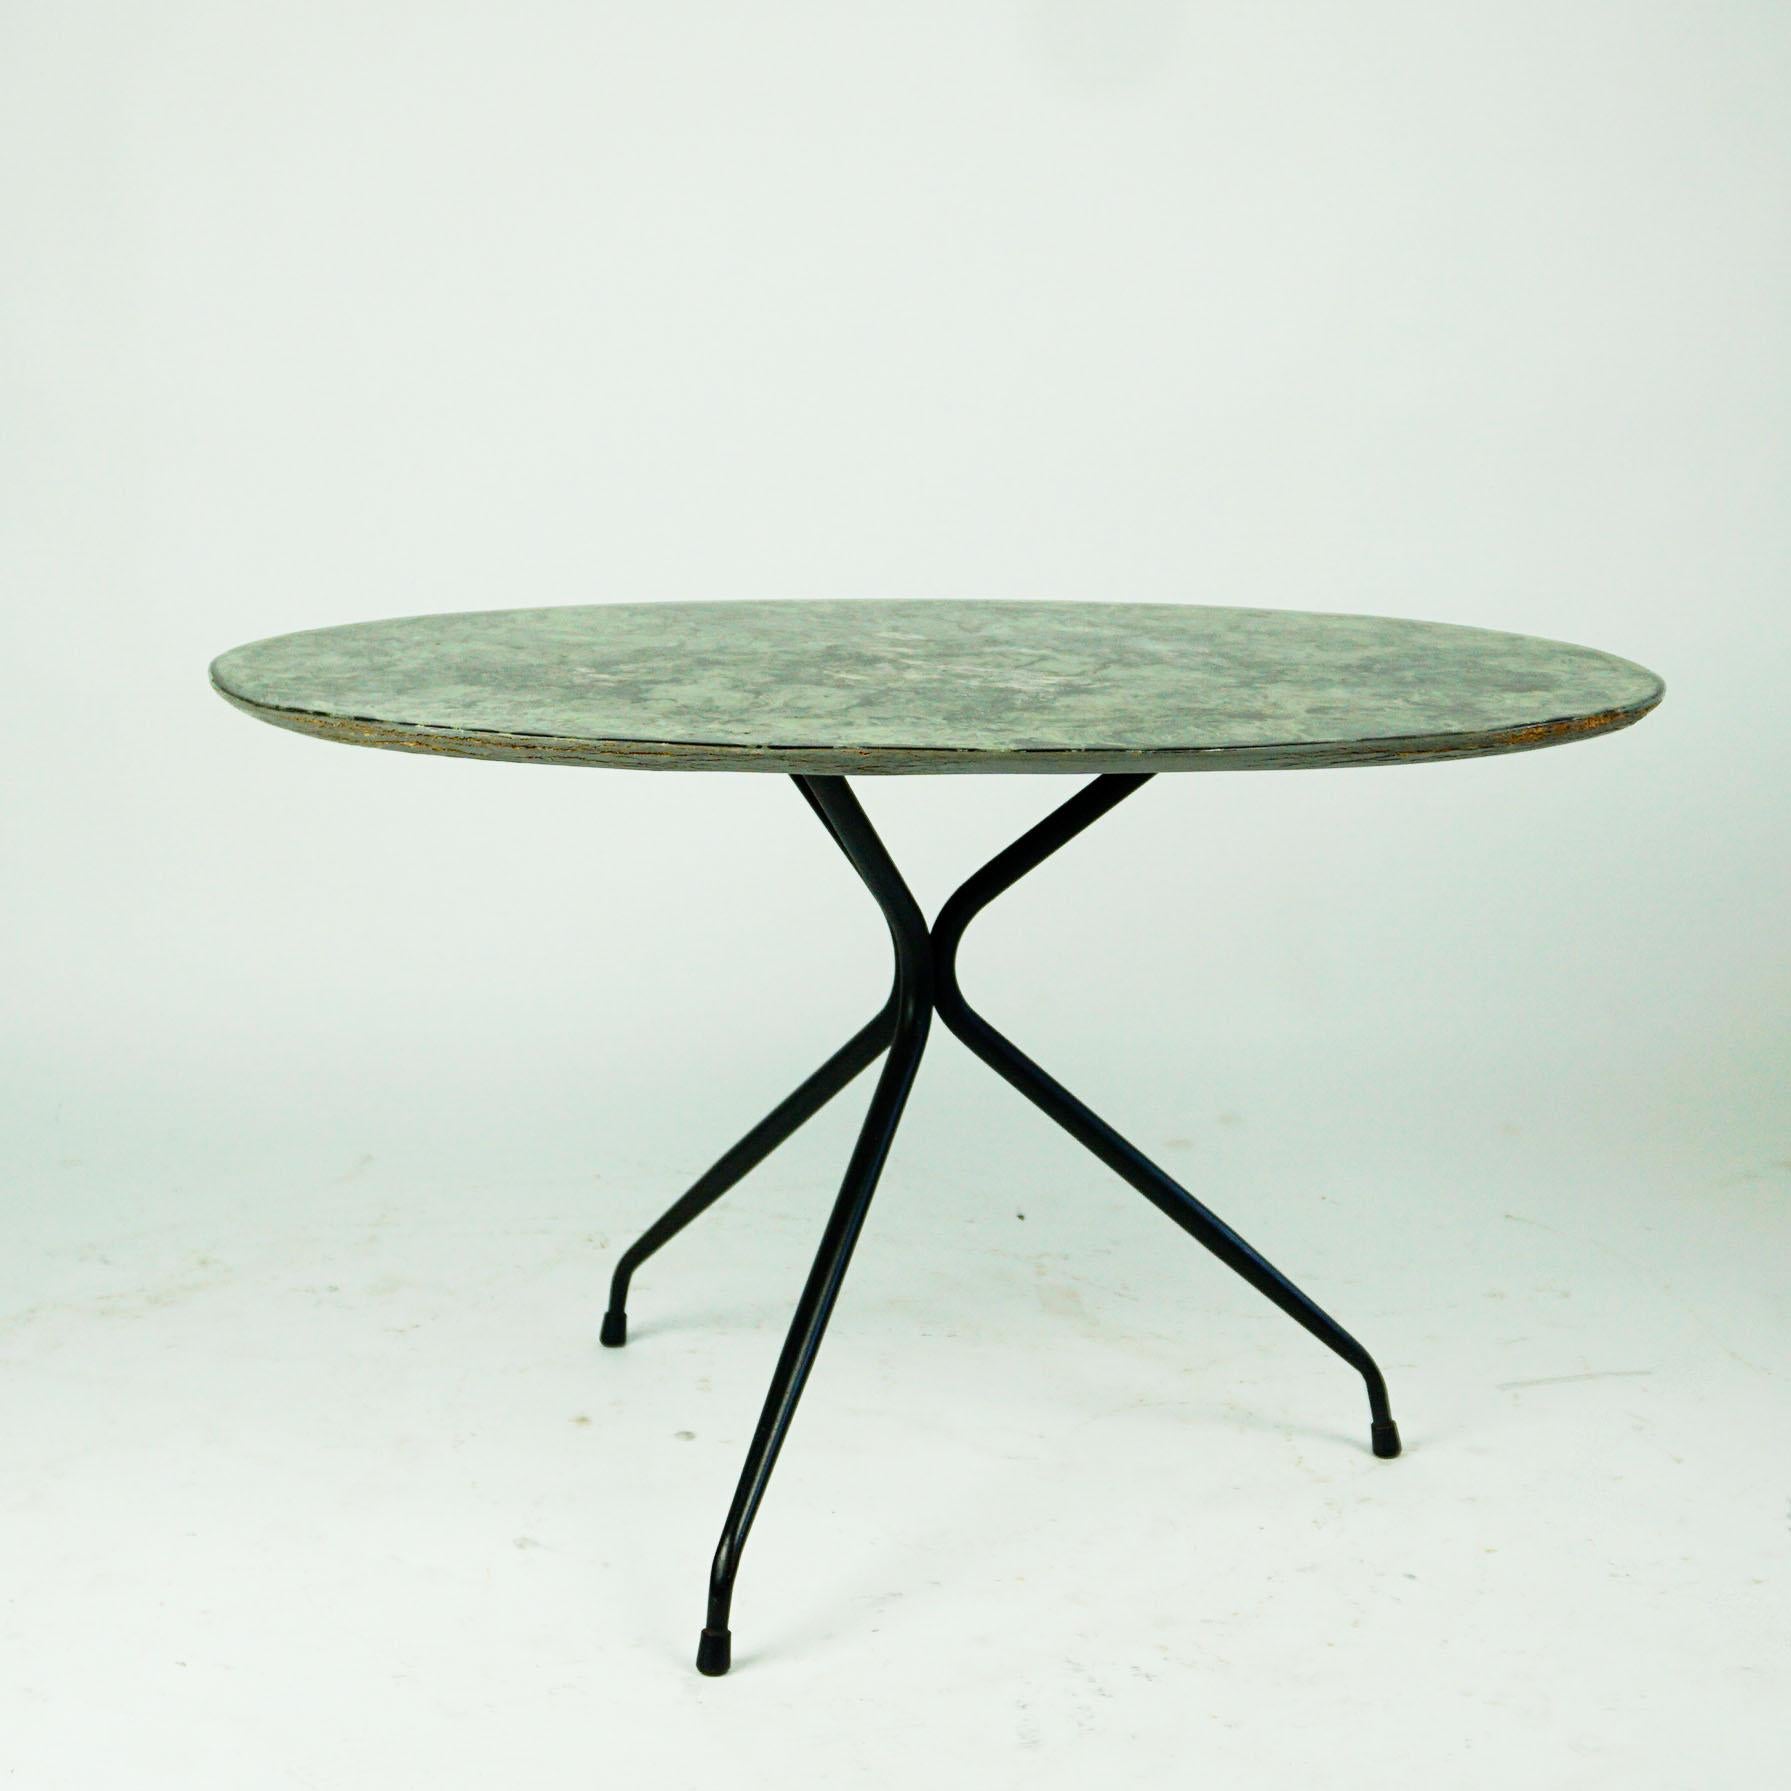 Mid-Century Modern Italian Midcentury Oval Cocktail or Coffee Table with Faux Green Marble Top